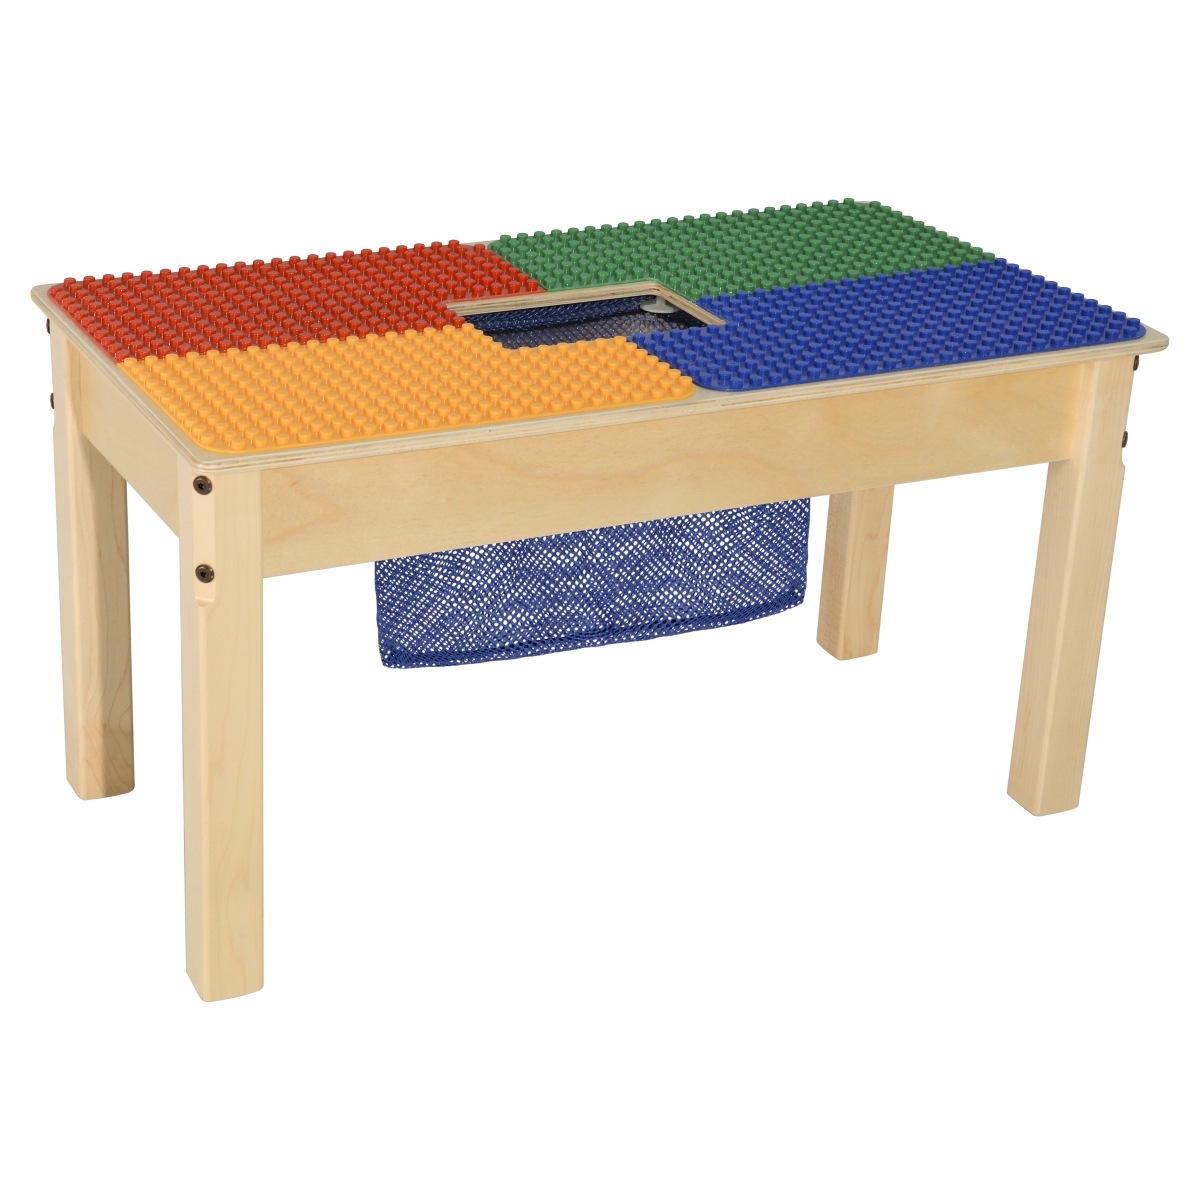 Tp1631pgn16 16 In. Duplo Compatible Rectangle Table With Legs, Multi Color